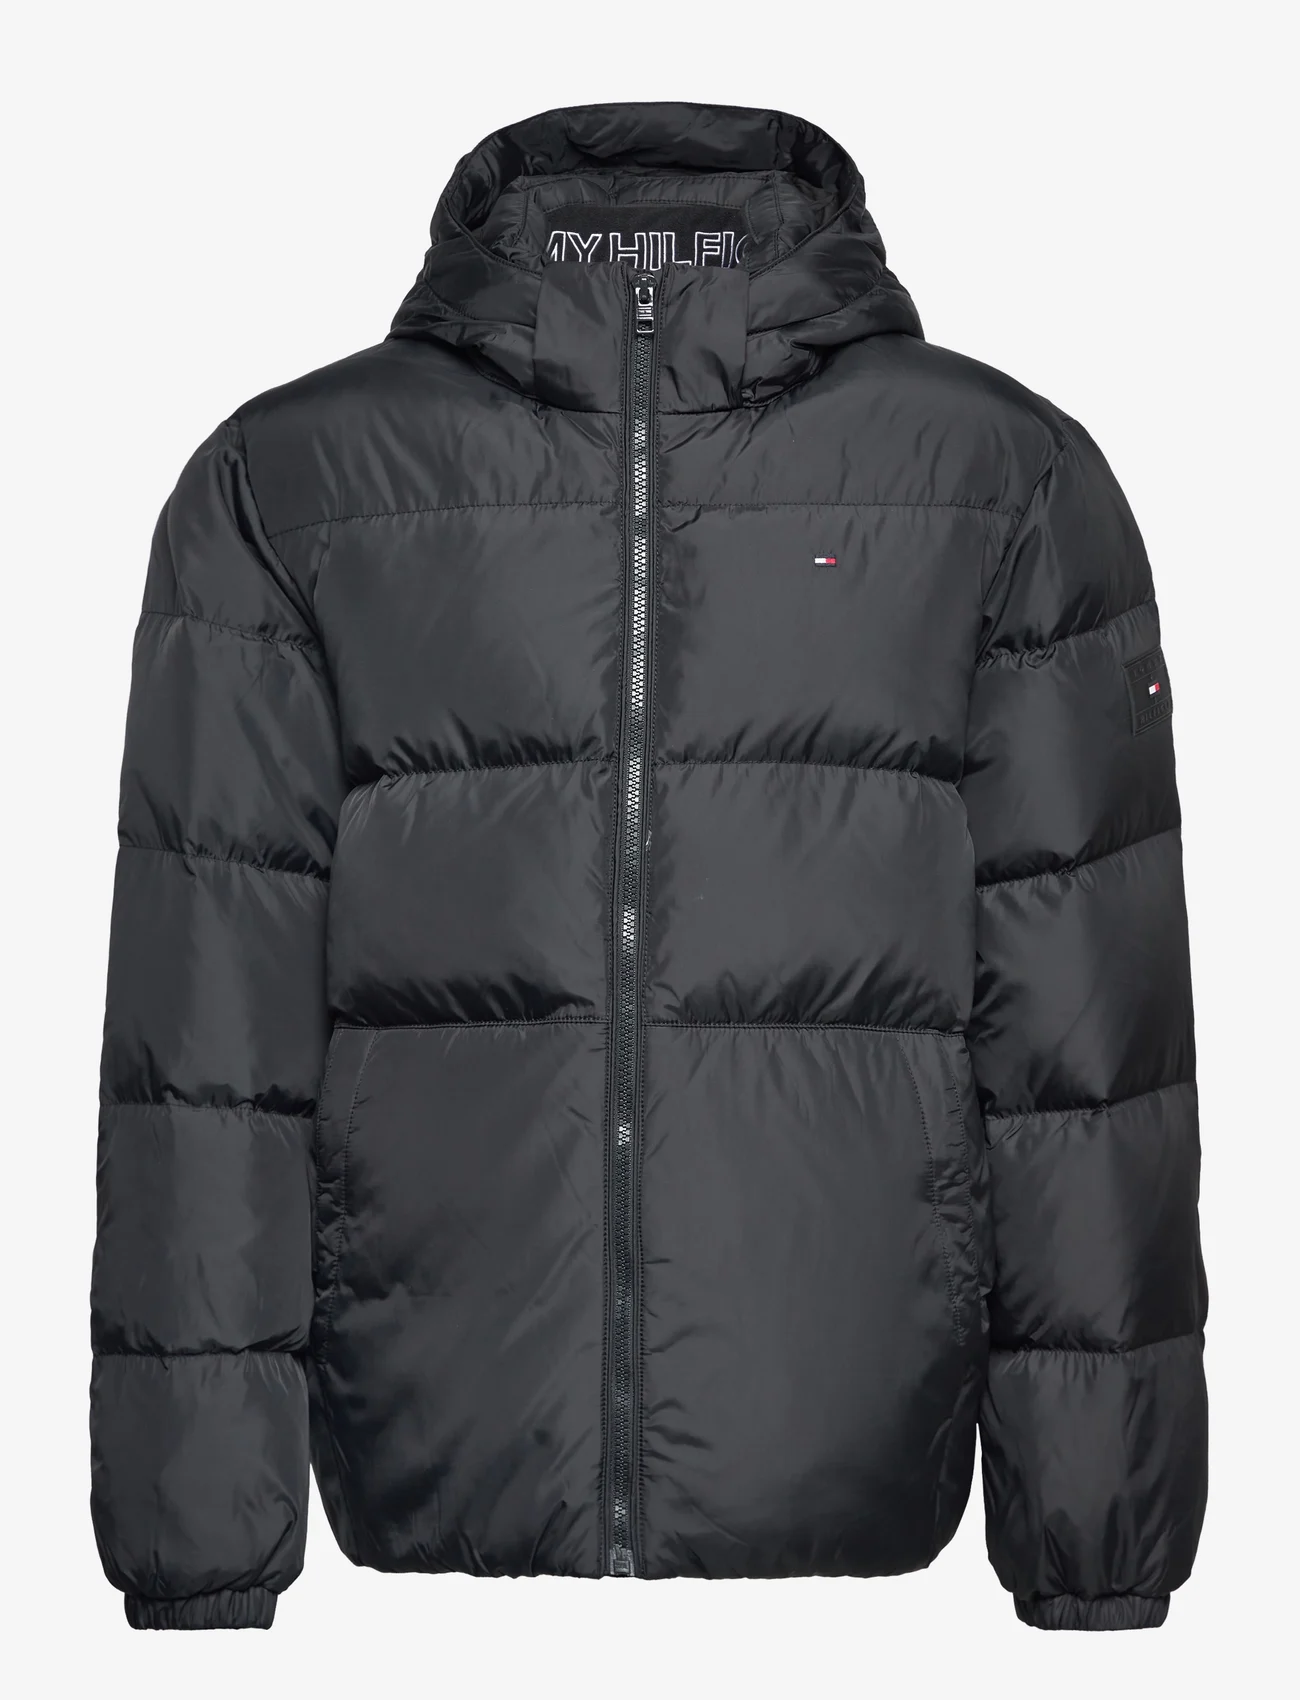 Tommy Hilfiger - ESSENTIAL DOWN JACKET - puffer & padded - black - 0